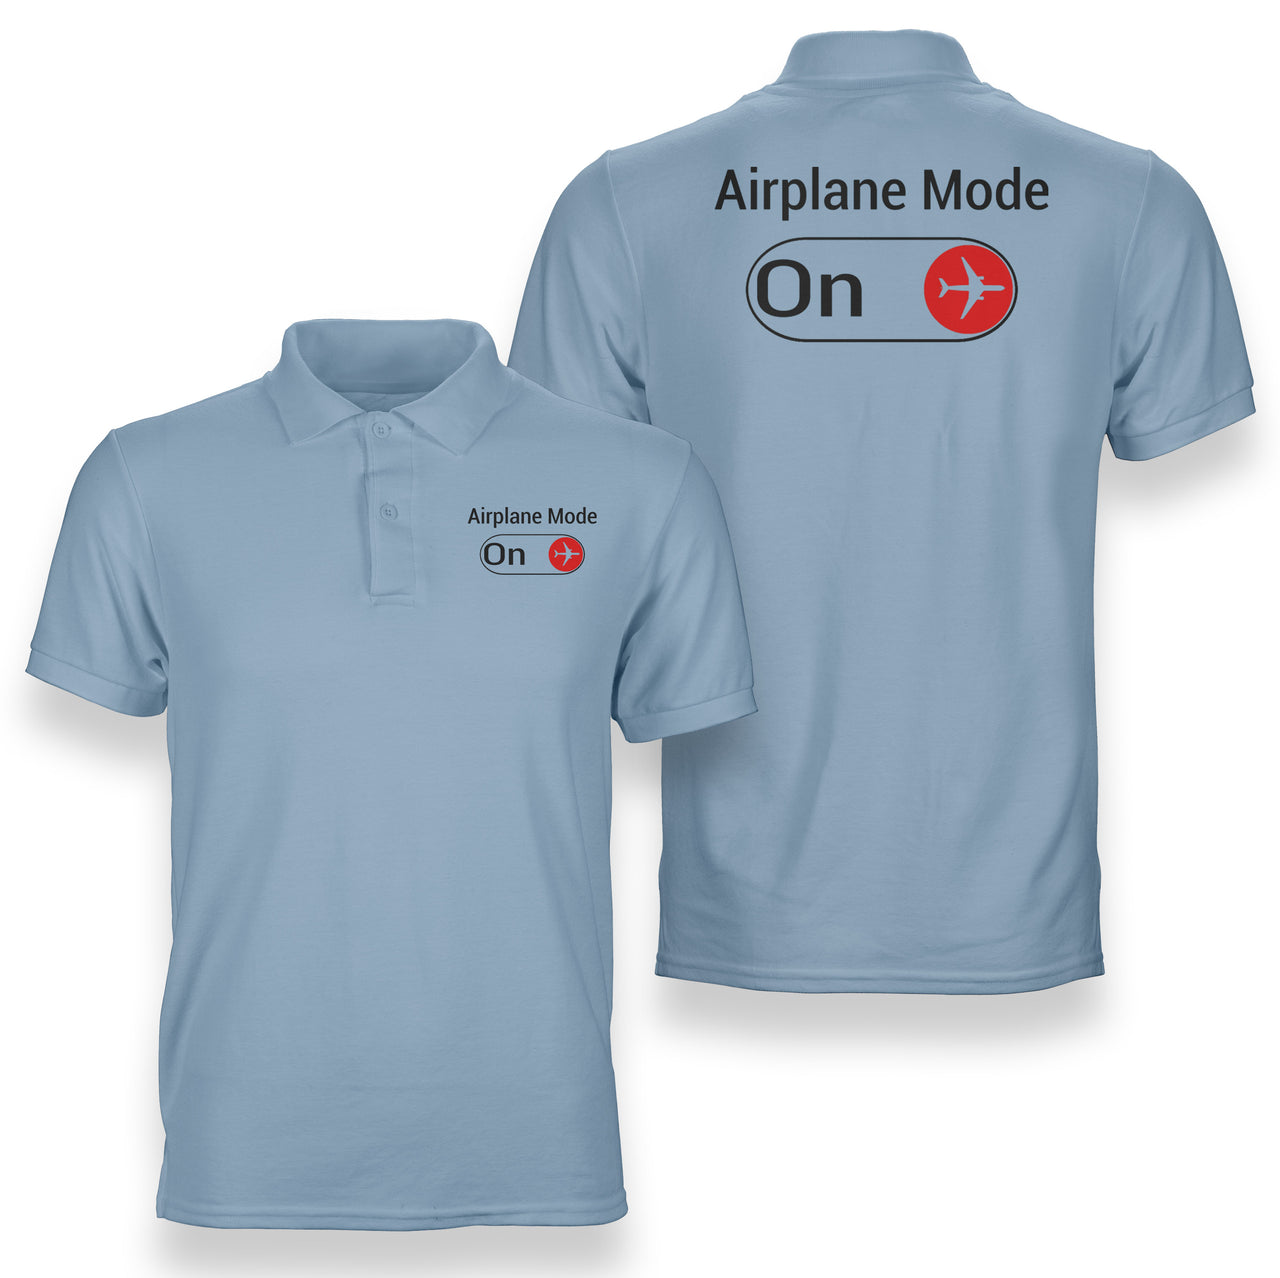 Airplane Mode On Designed Double Side Polo T-Shirts